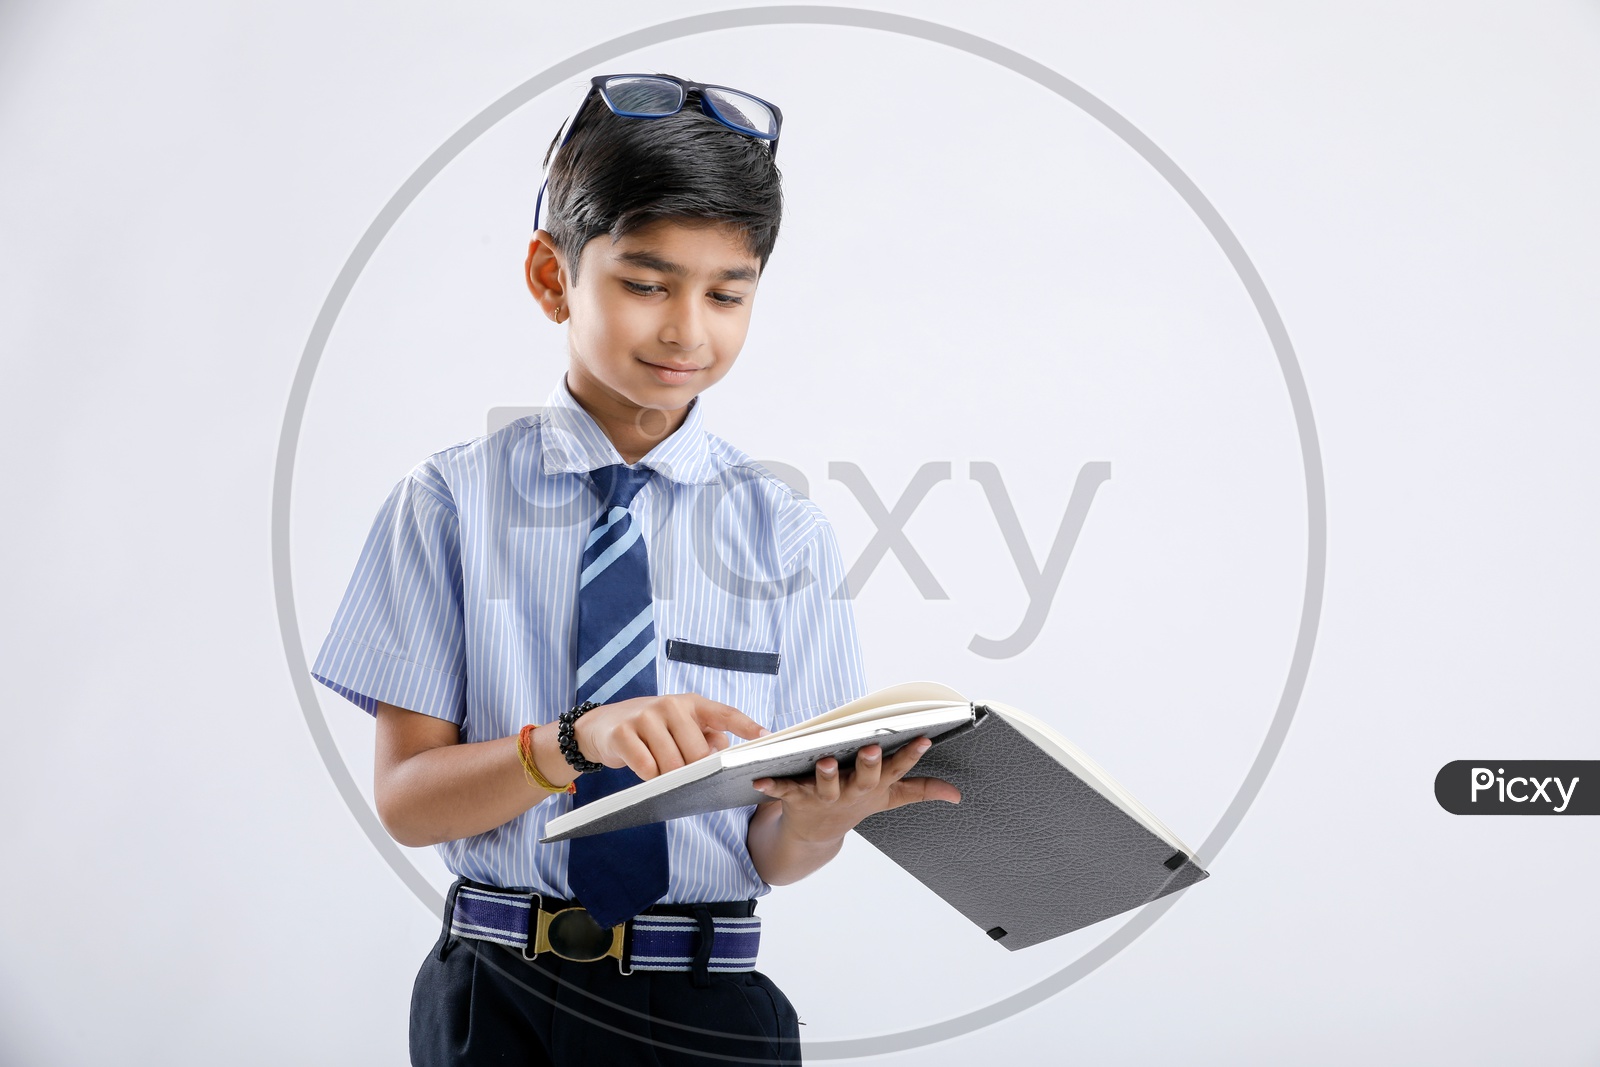 Indian Or Asian Boy Or Kid Or student in School Uniform  Wearing Spectacles And  Reading Book  Over an Isolated White Background